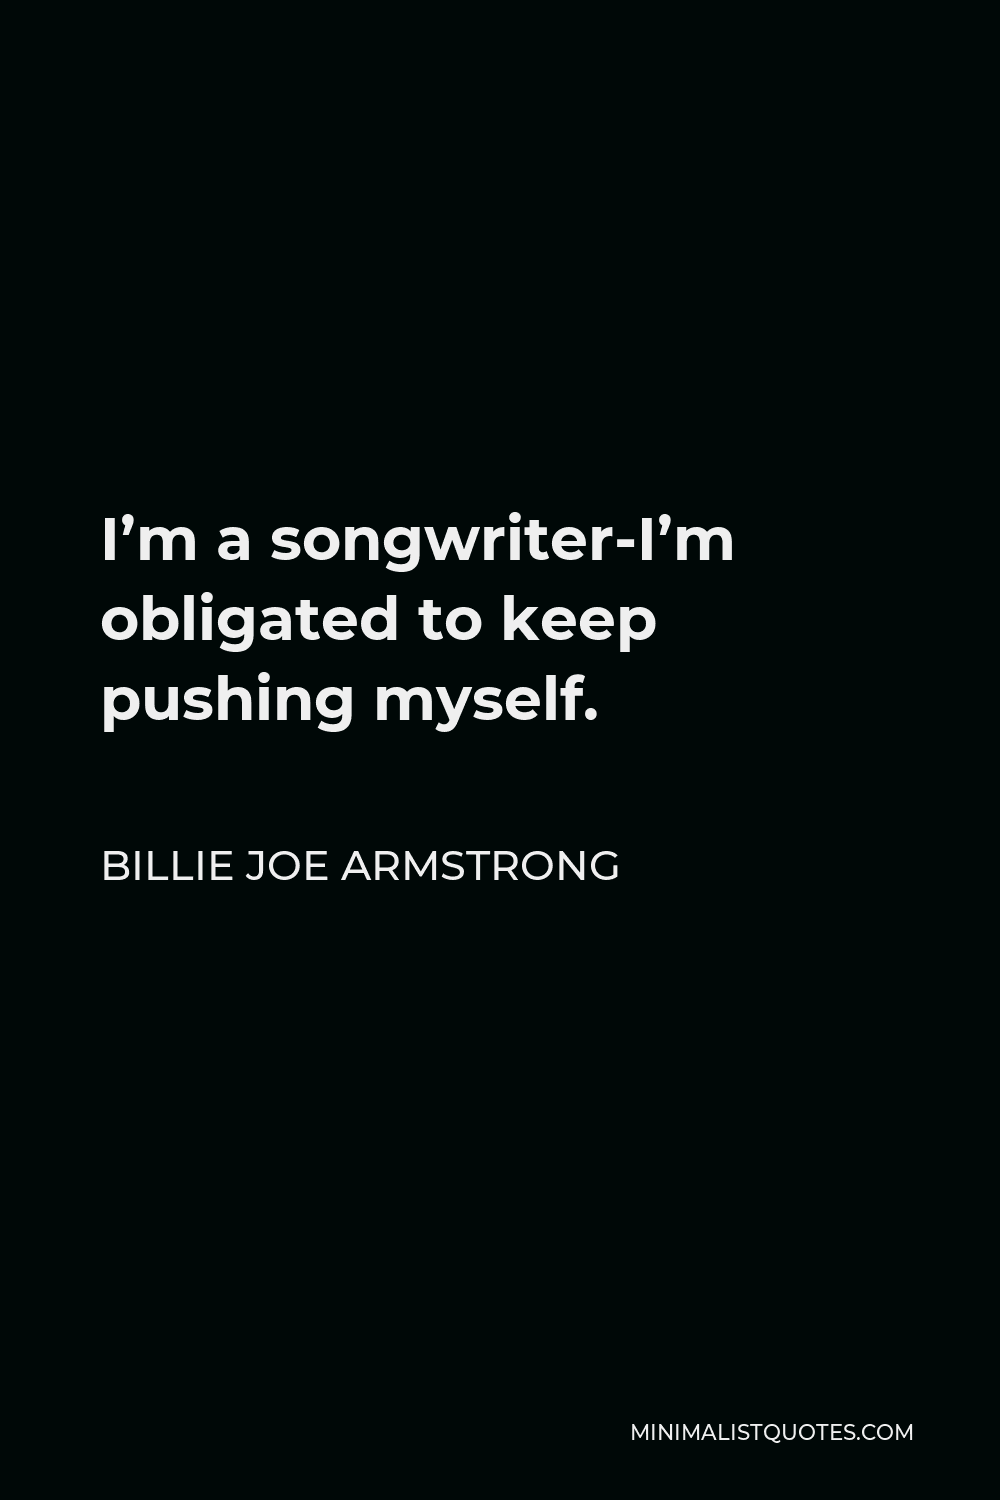 Billie Joe Armstrong Quote - I’m a songwriter-I’m obligated to keep pushing myself.